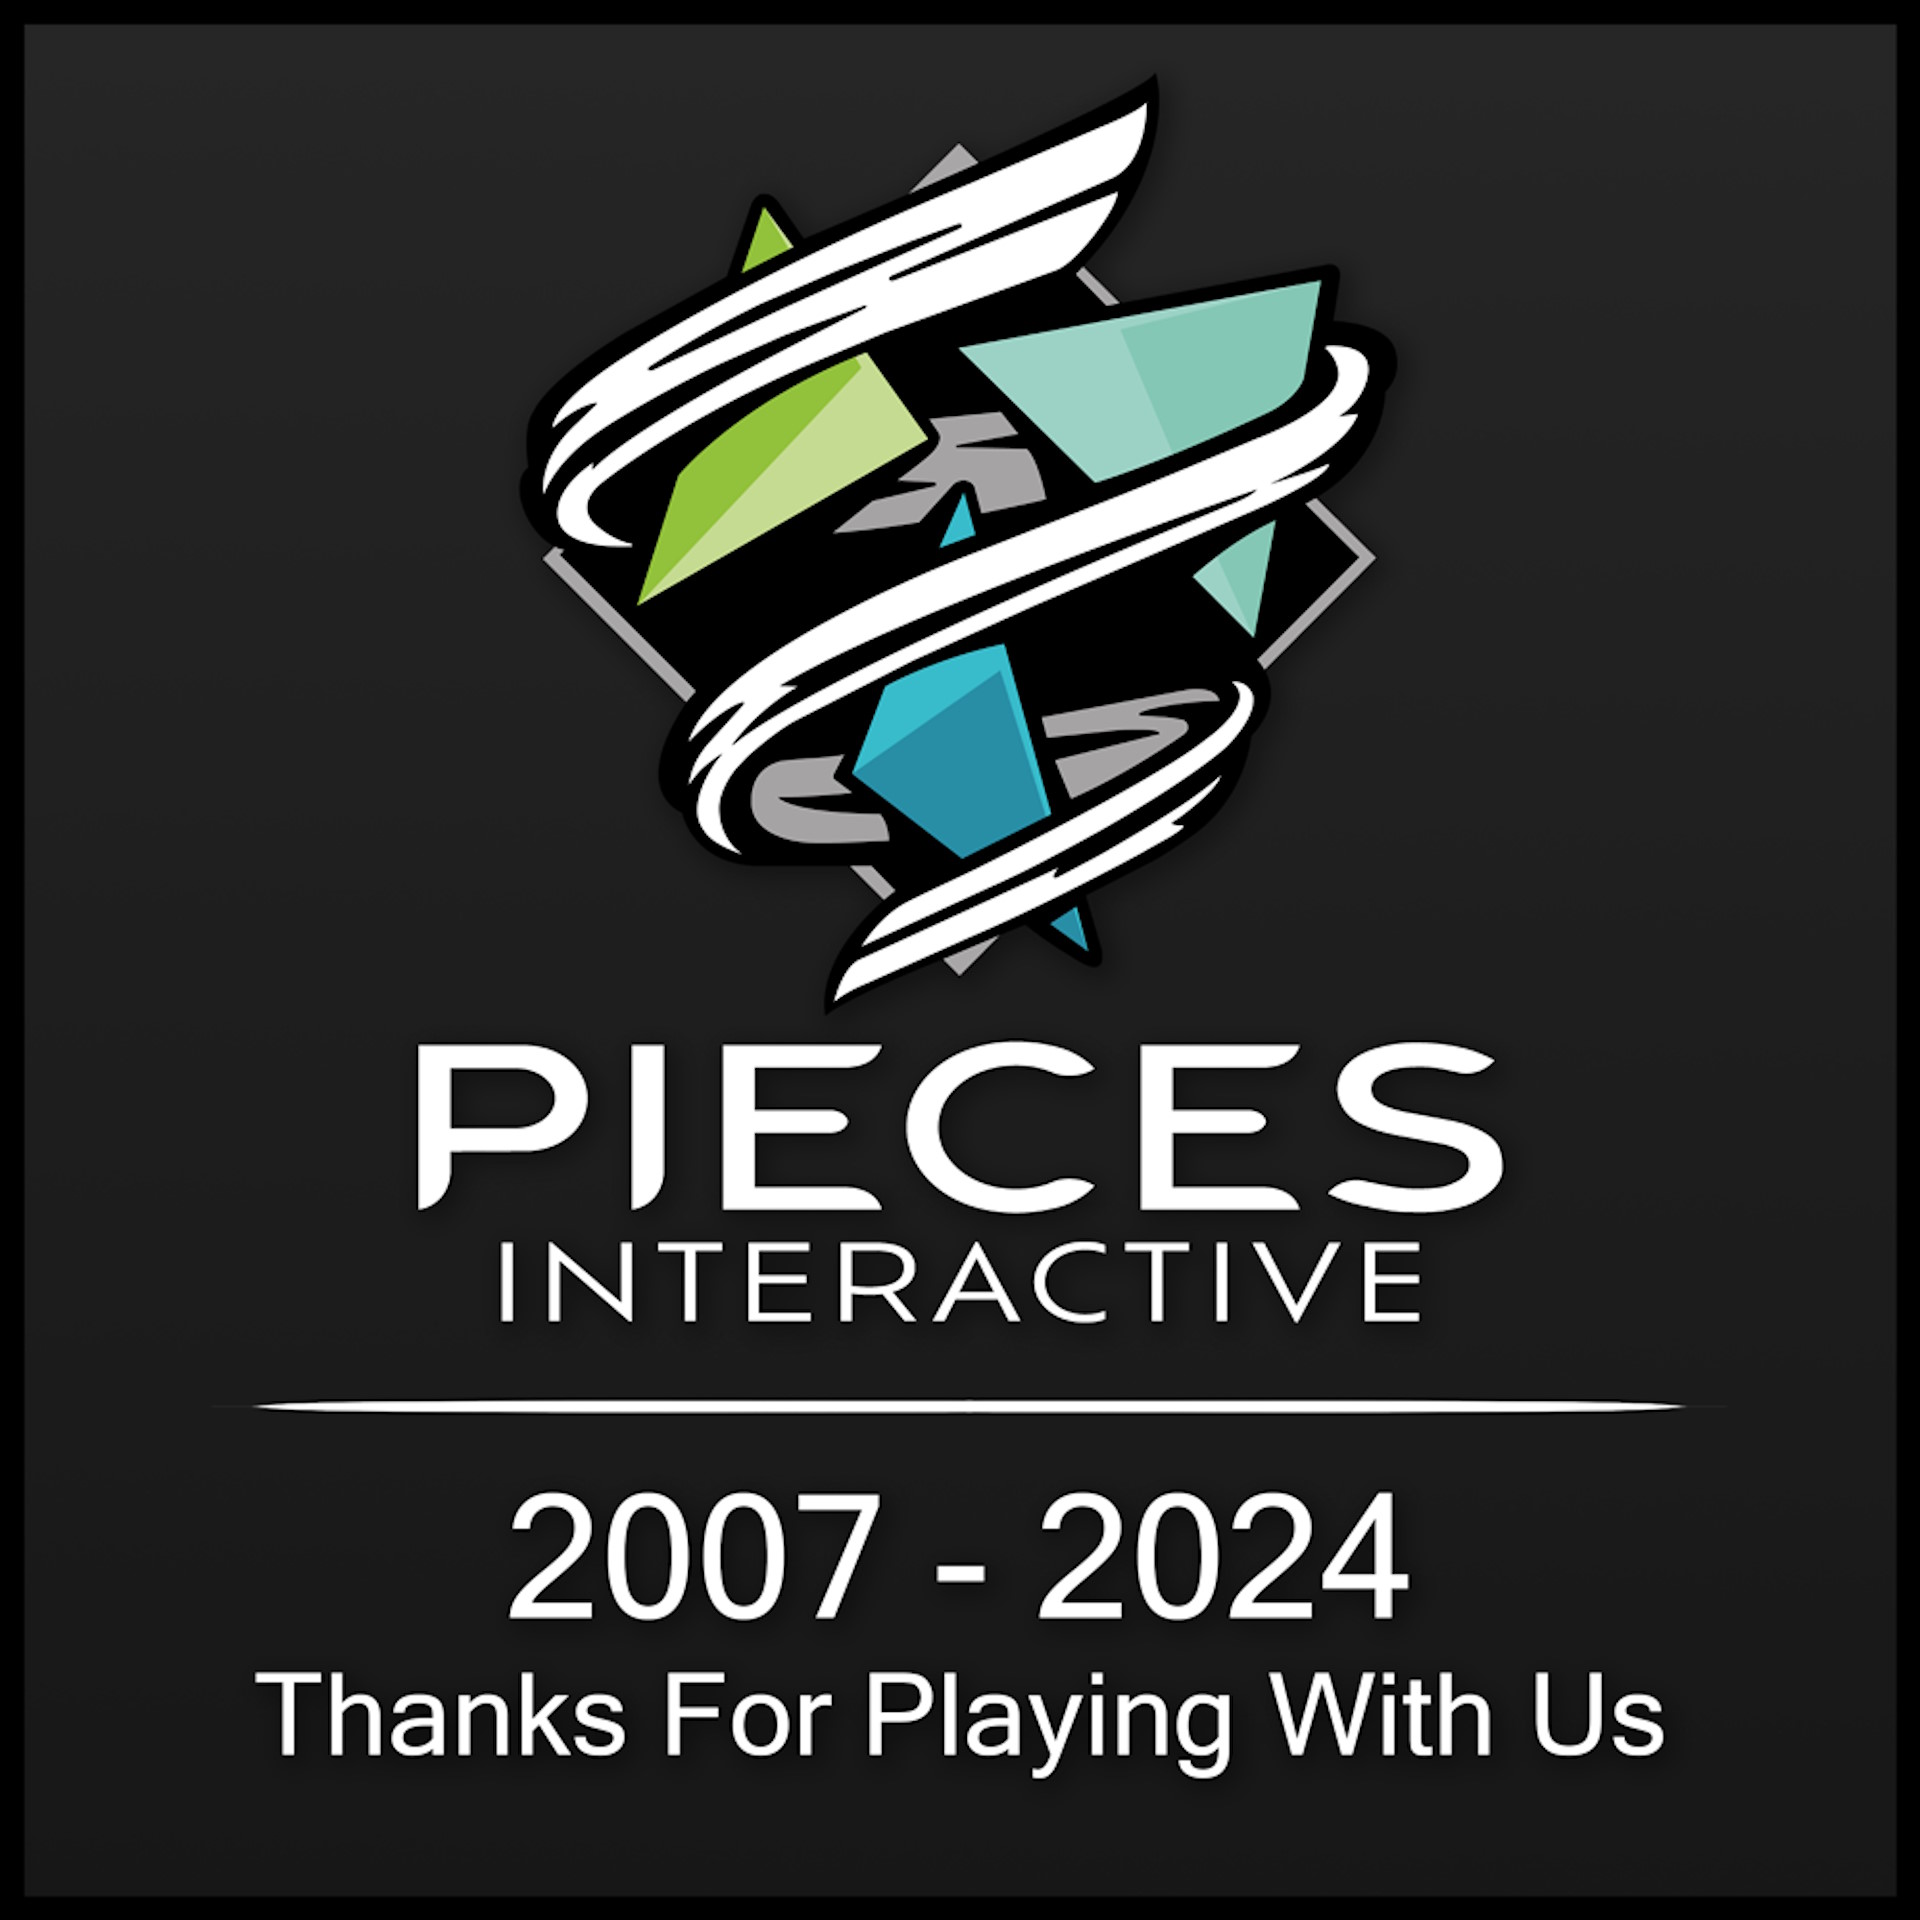 Pieces Interactive - 2007-2024 - Thanks for playing with us